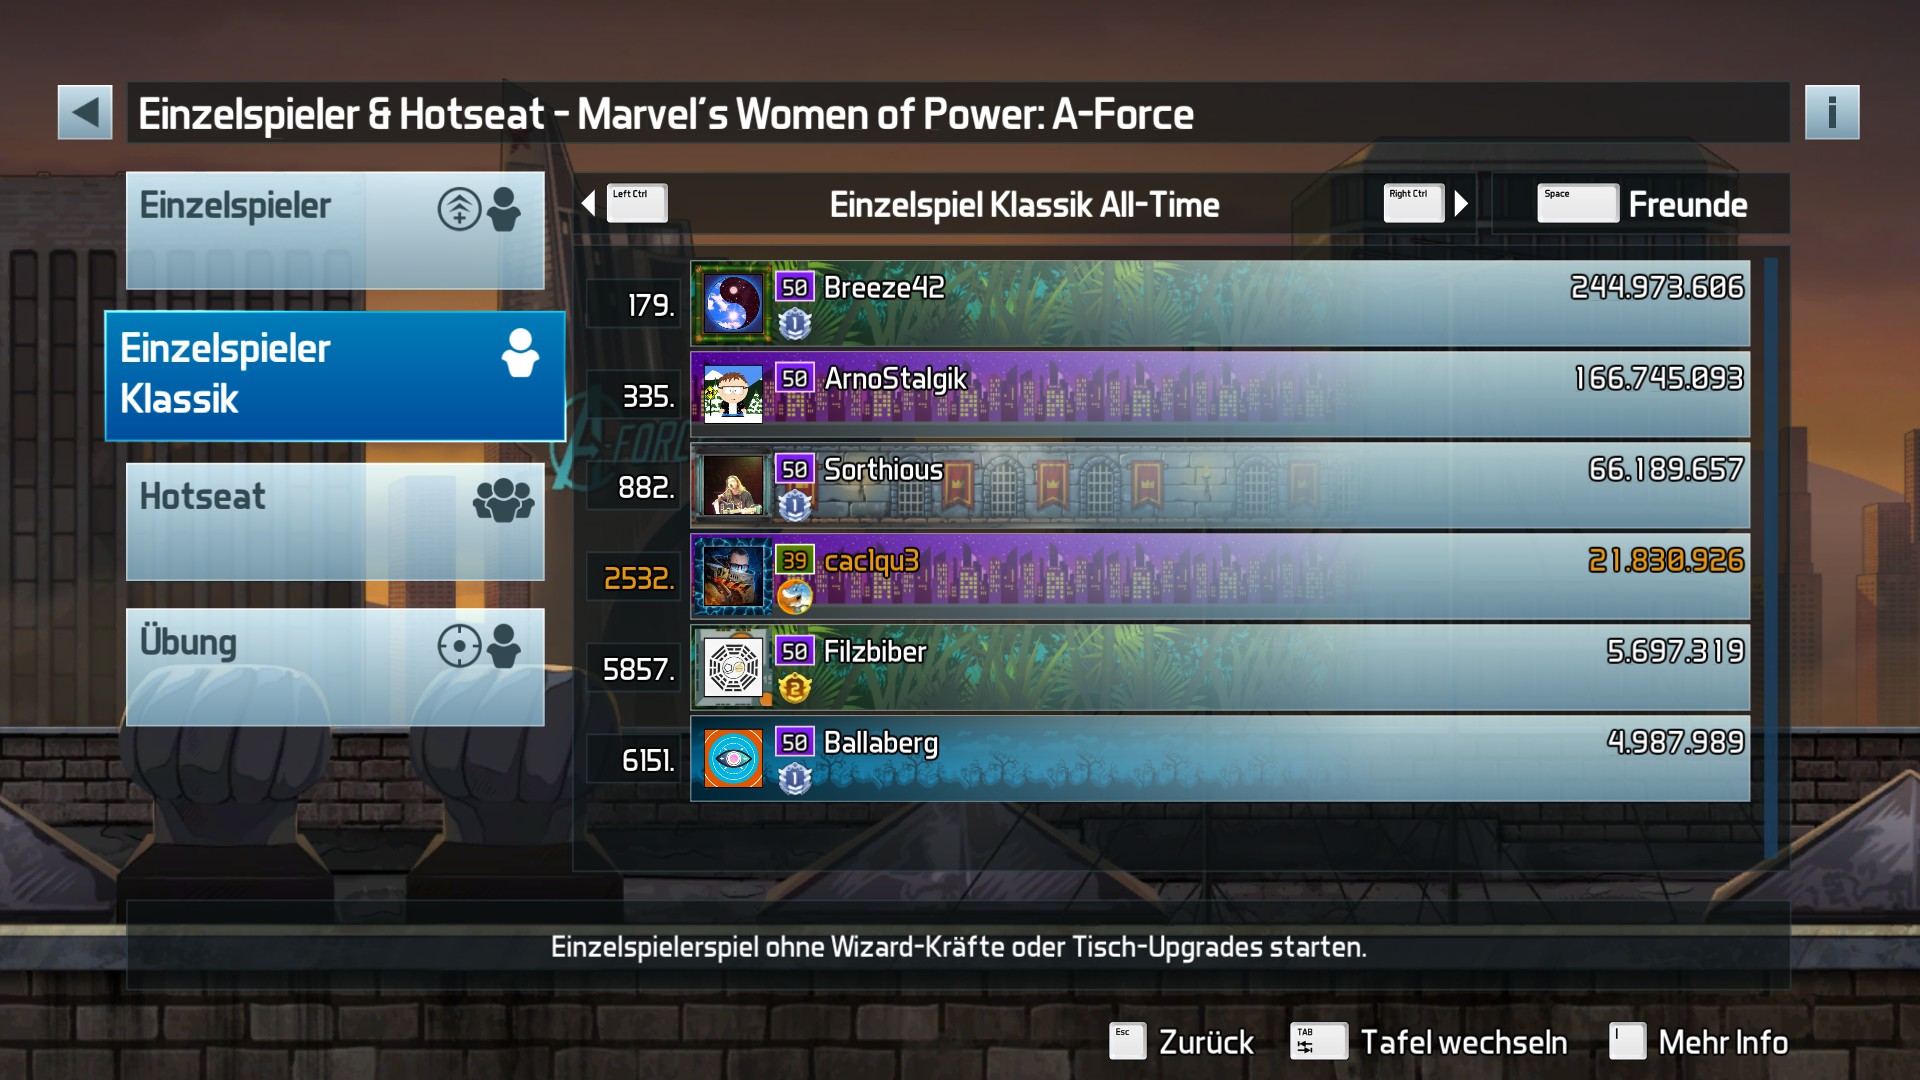 e2e4: Pinball FX3: Marvel’s Women of Power: A-Force [Classic] (PC) 21,830,926 points on 2022-05-16 00:33:46